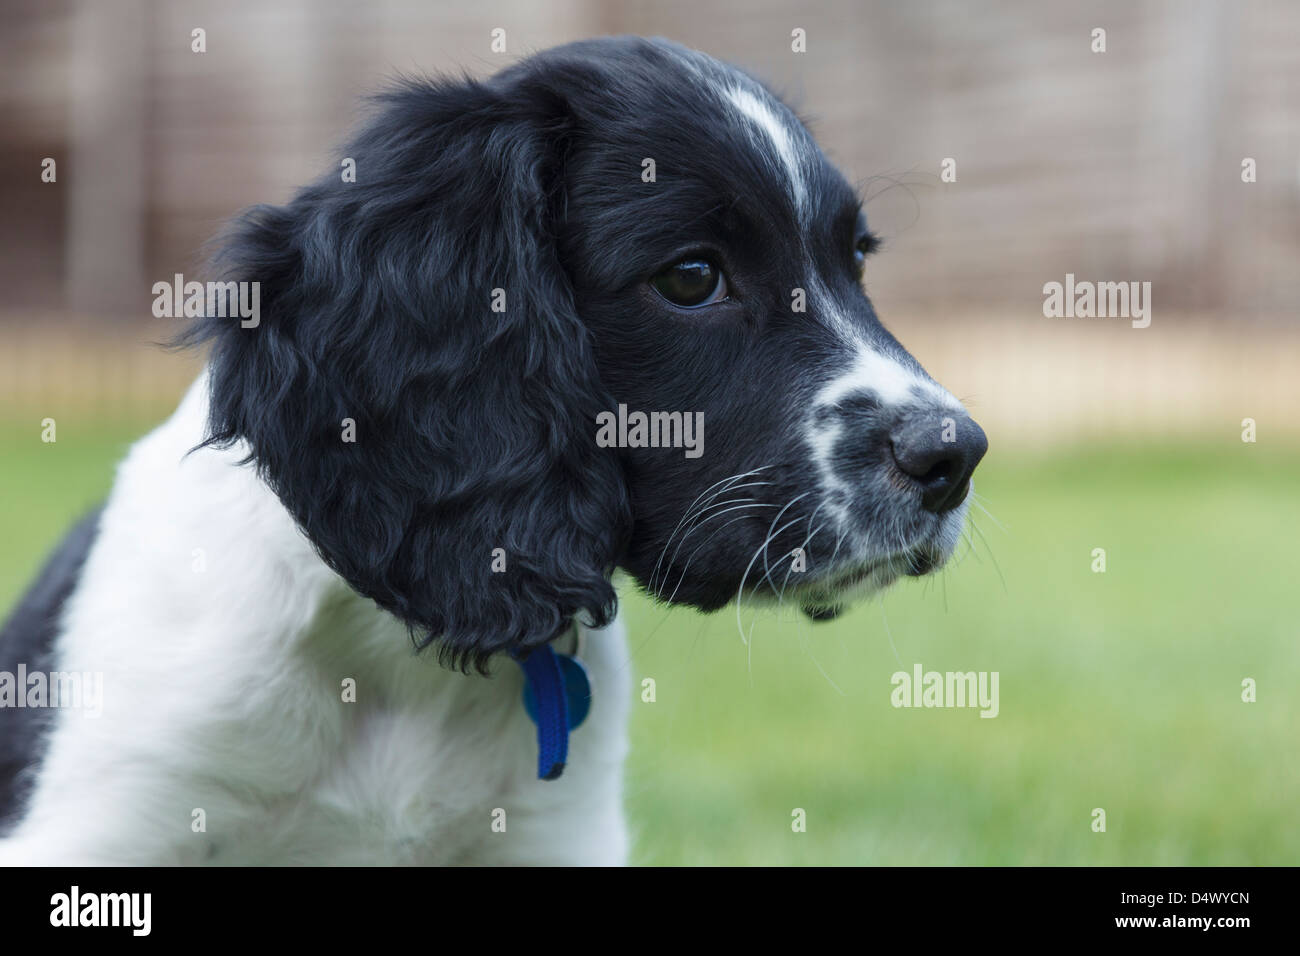 Portrait of a cute ten week old black and white English Springer Spaniel puppy dog in a garden. England, UK, Britain Stock Photo